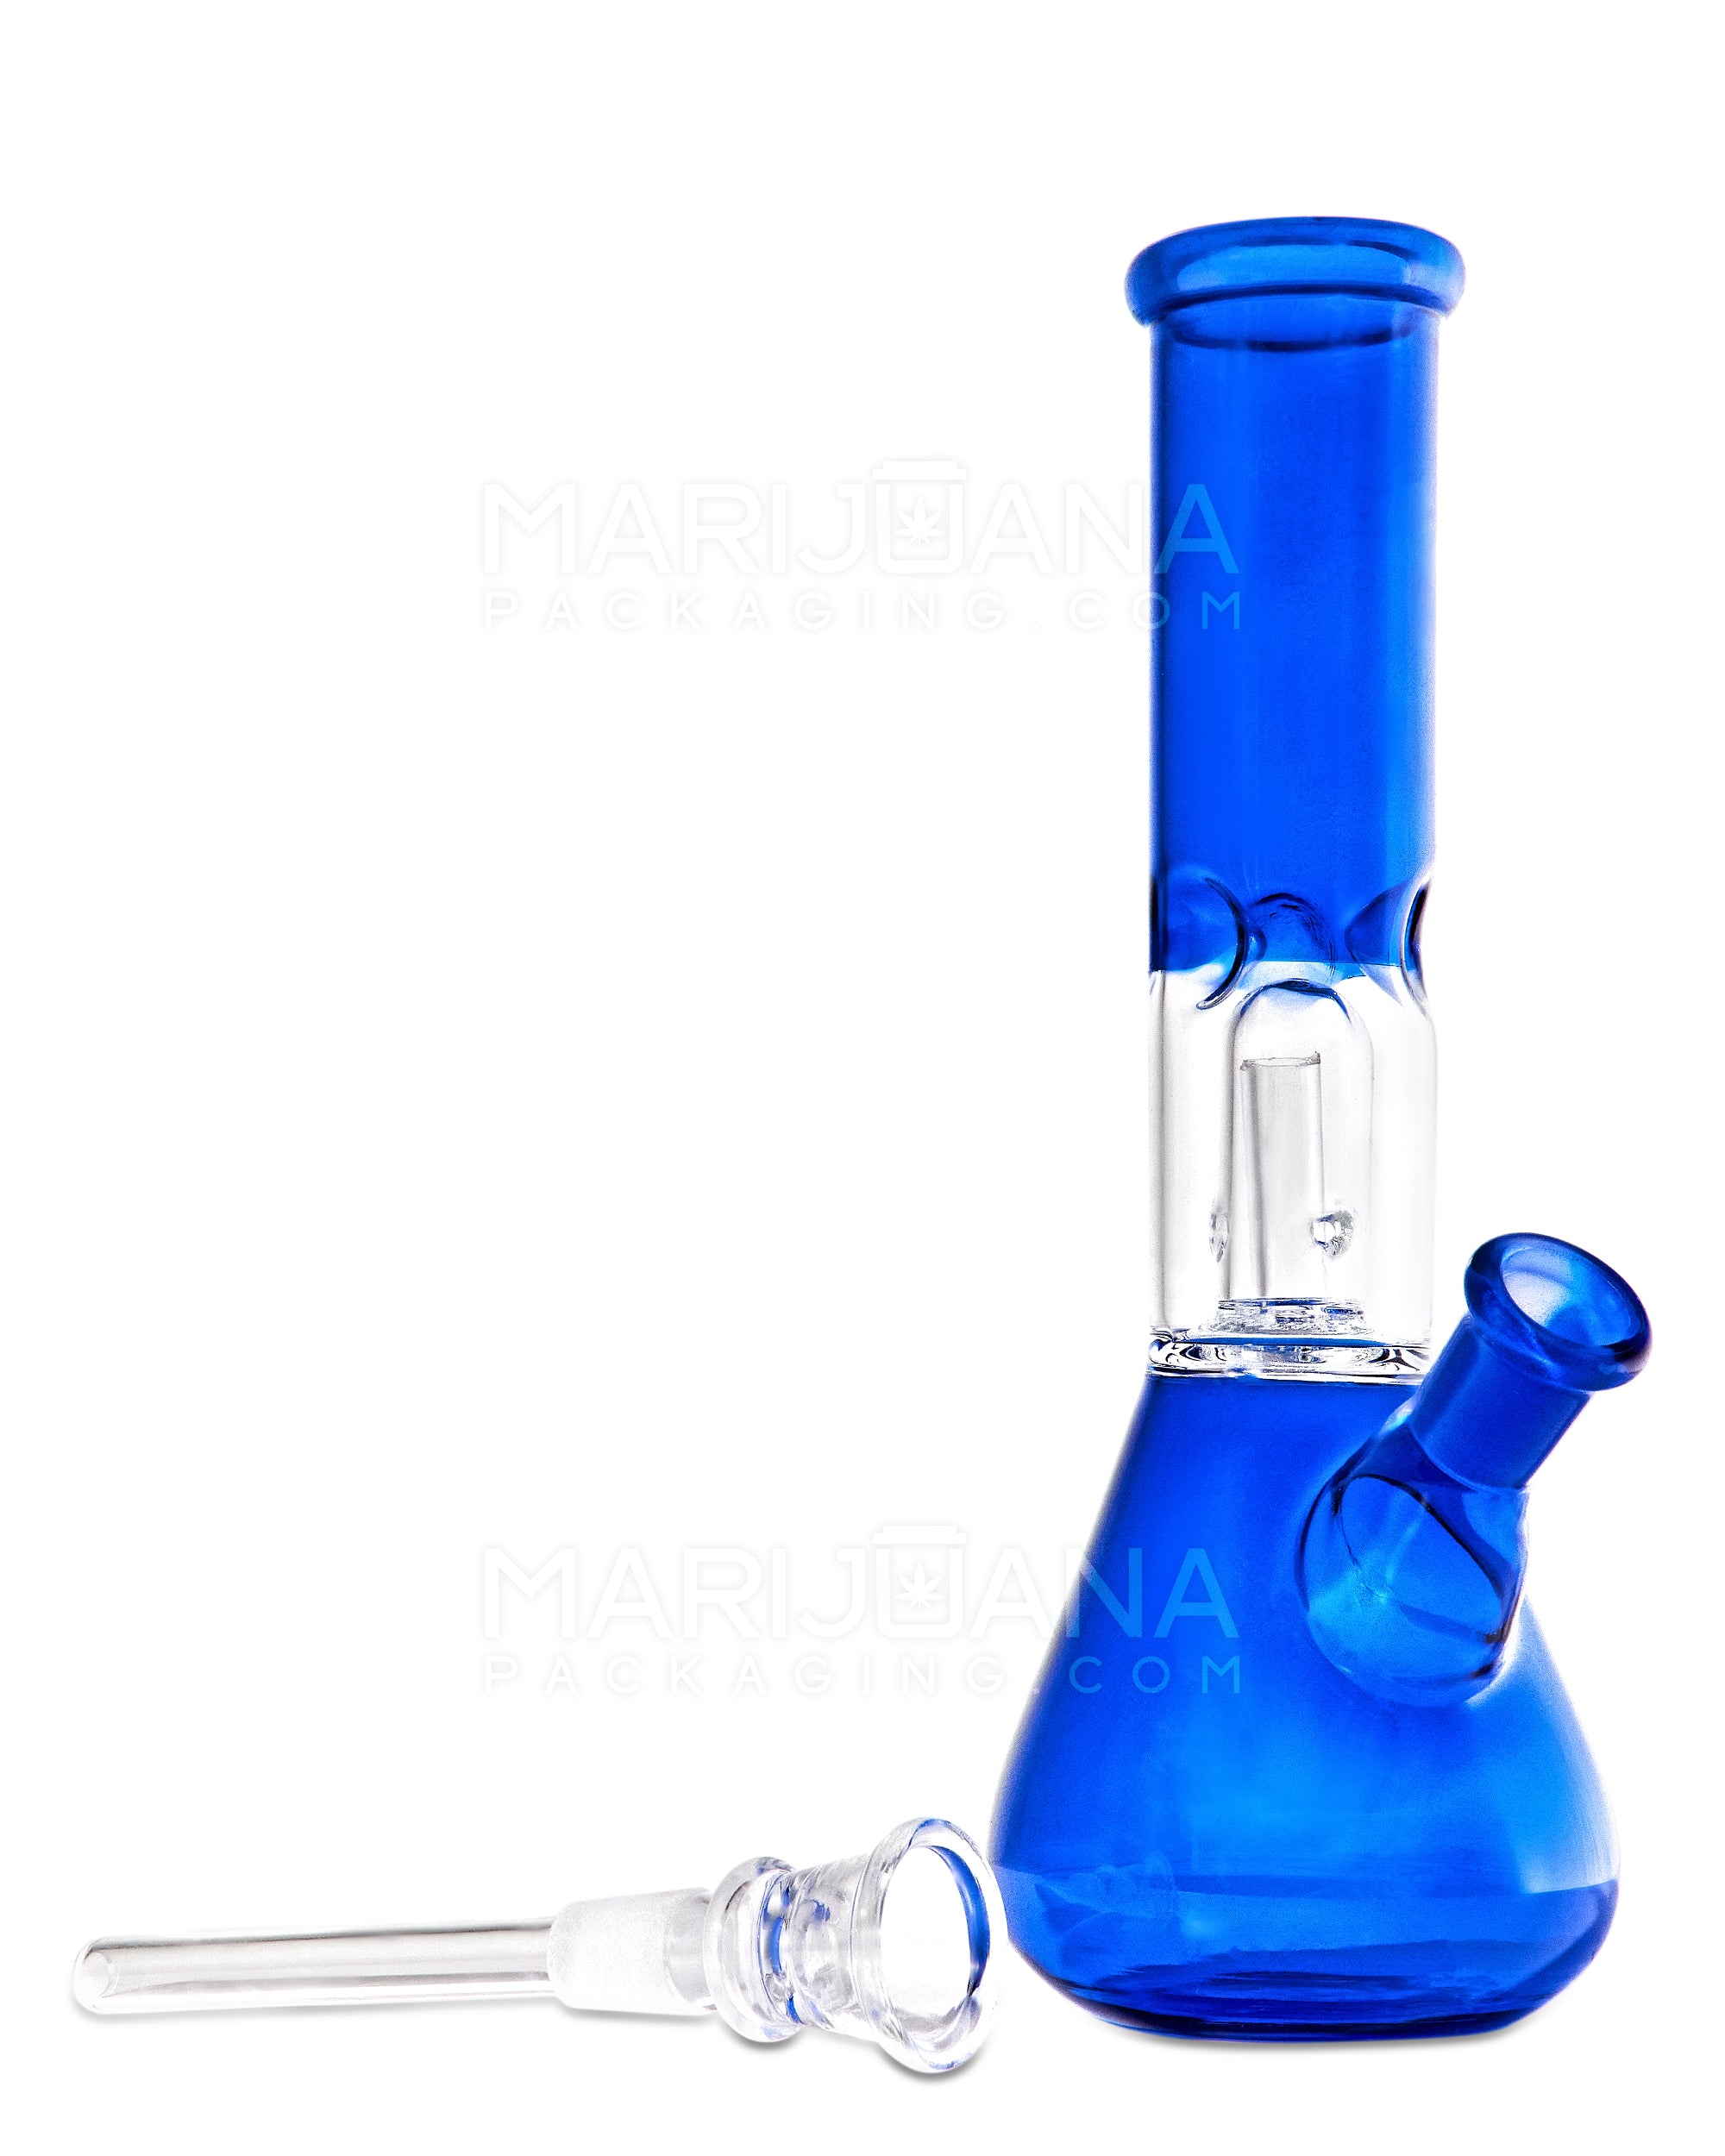 Straight Neck Dome Perc Glass Egg Water Pipe w/ Ice Catcher | 7.5in Tall - 14mm Bowl - Assorted - 2